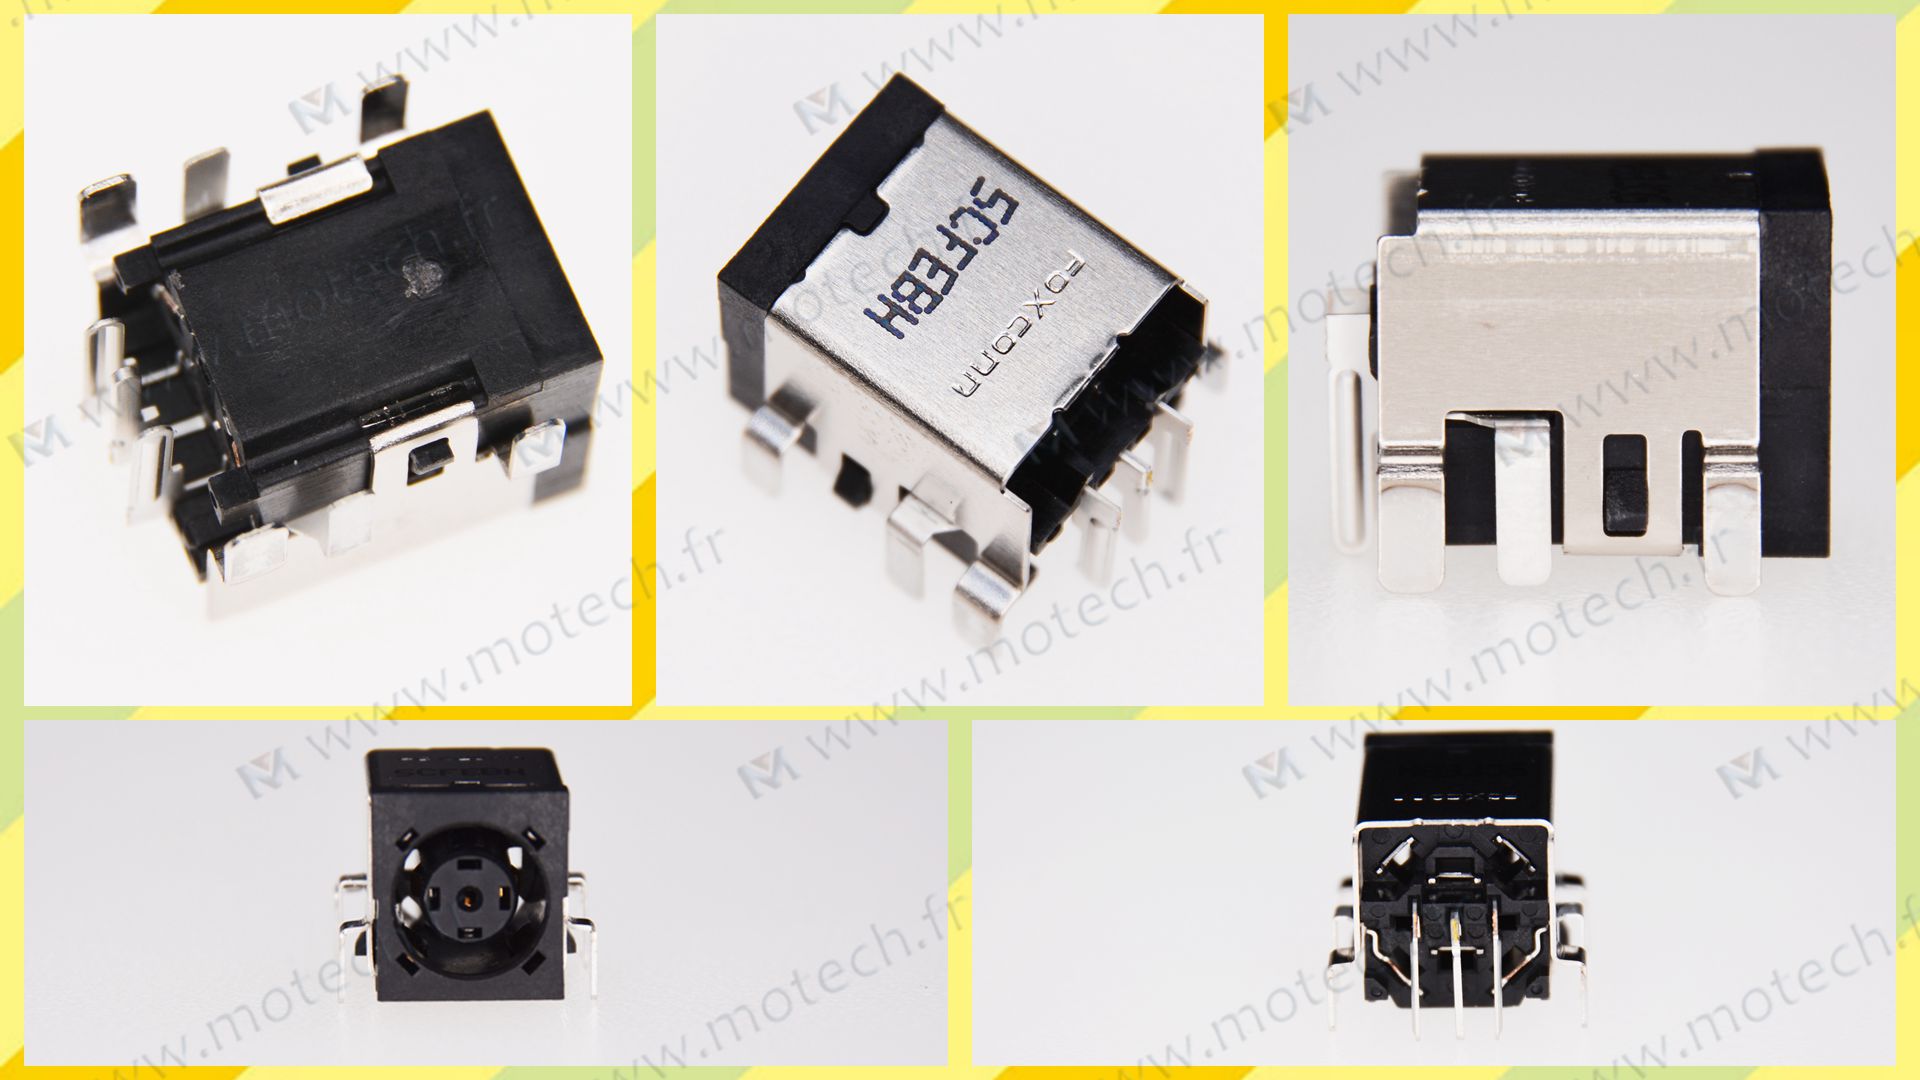 HP 6830S charging connector, HP 6830S DC Power Jack, HP 6830S Power Jack, HP 6830S plug, HP 6830S Jack socket, HP 6830S connecteur de charge, 